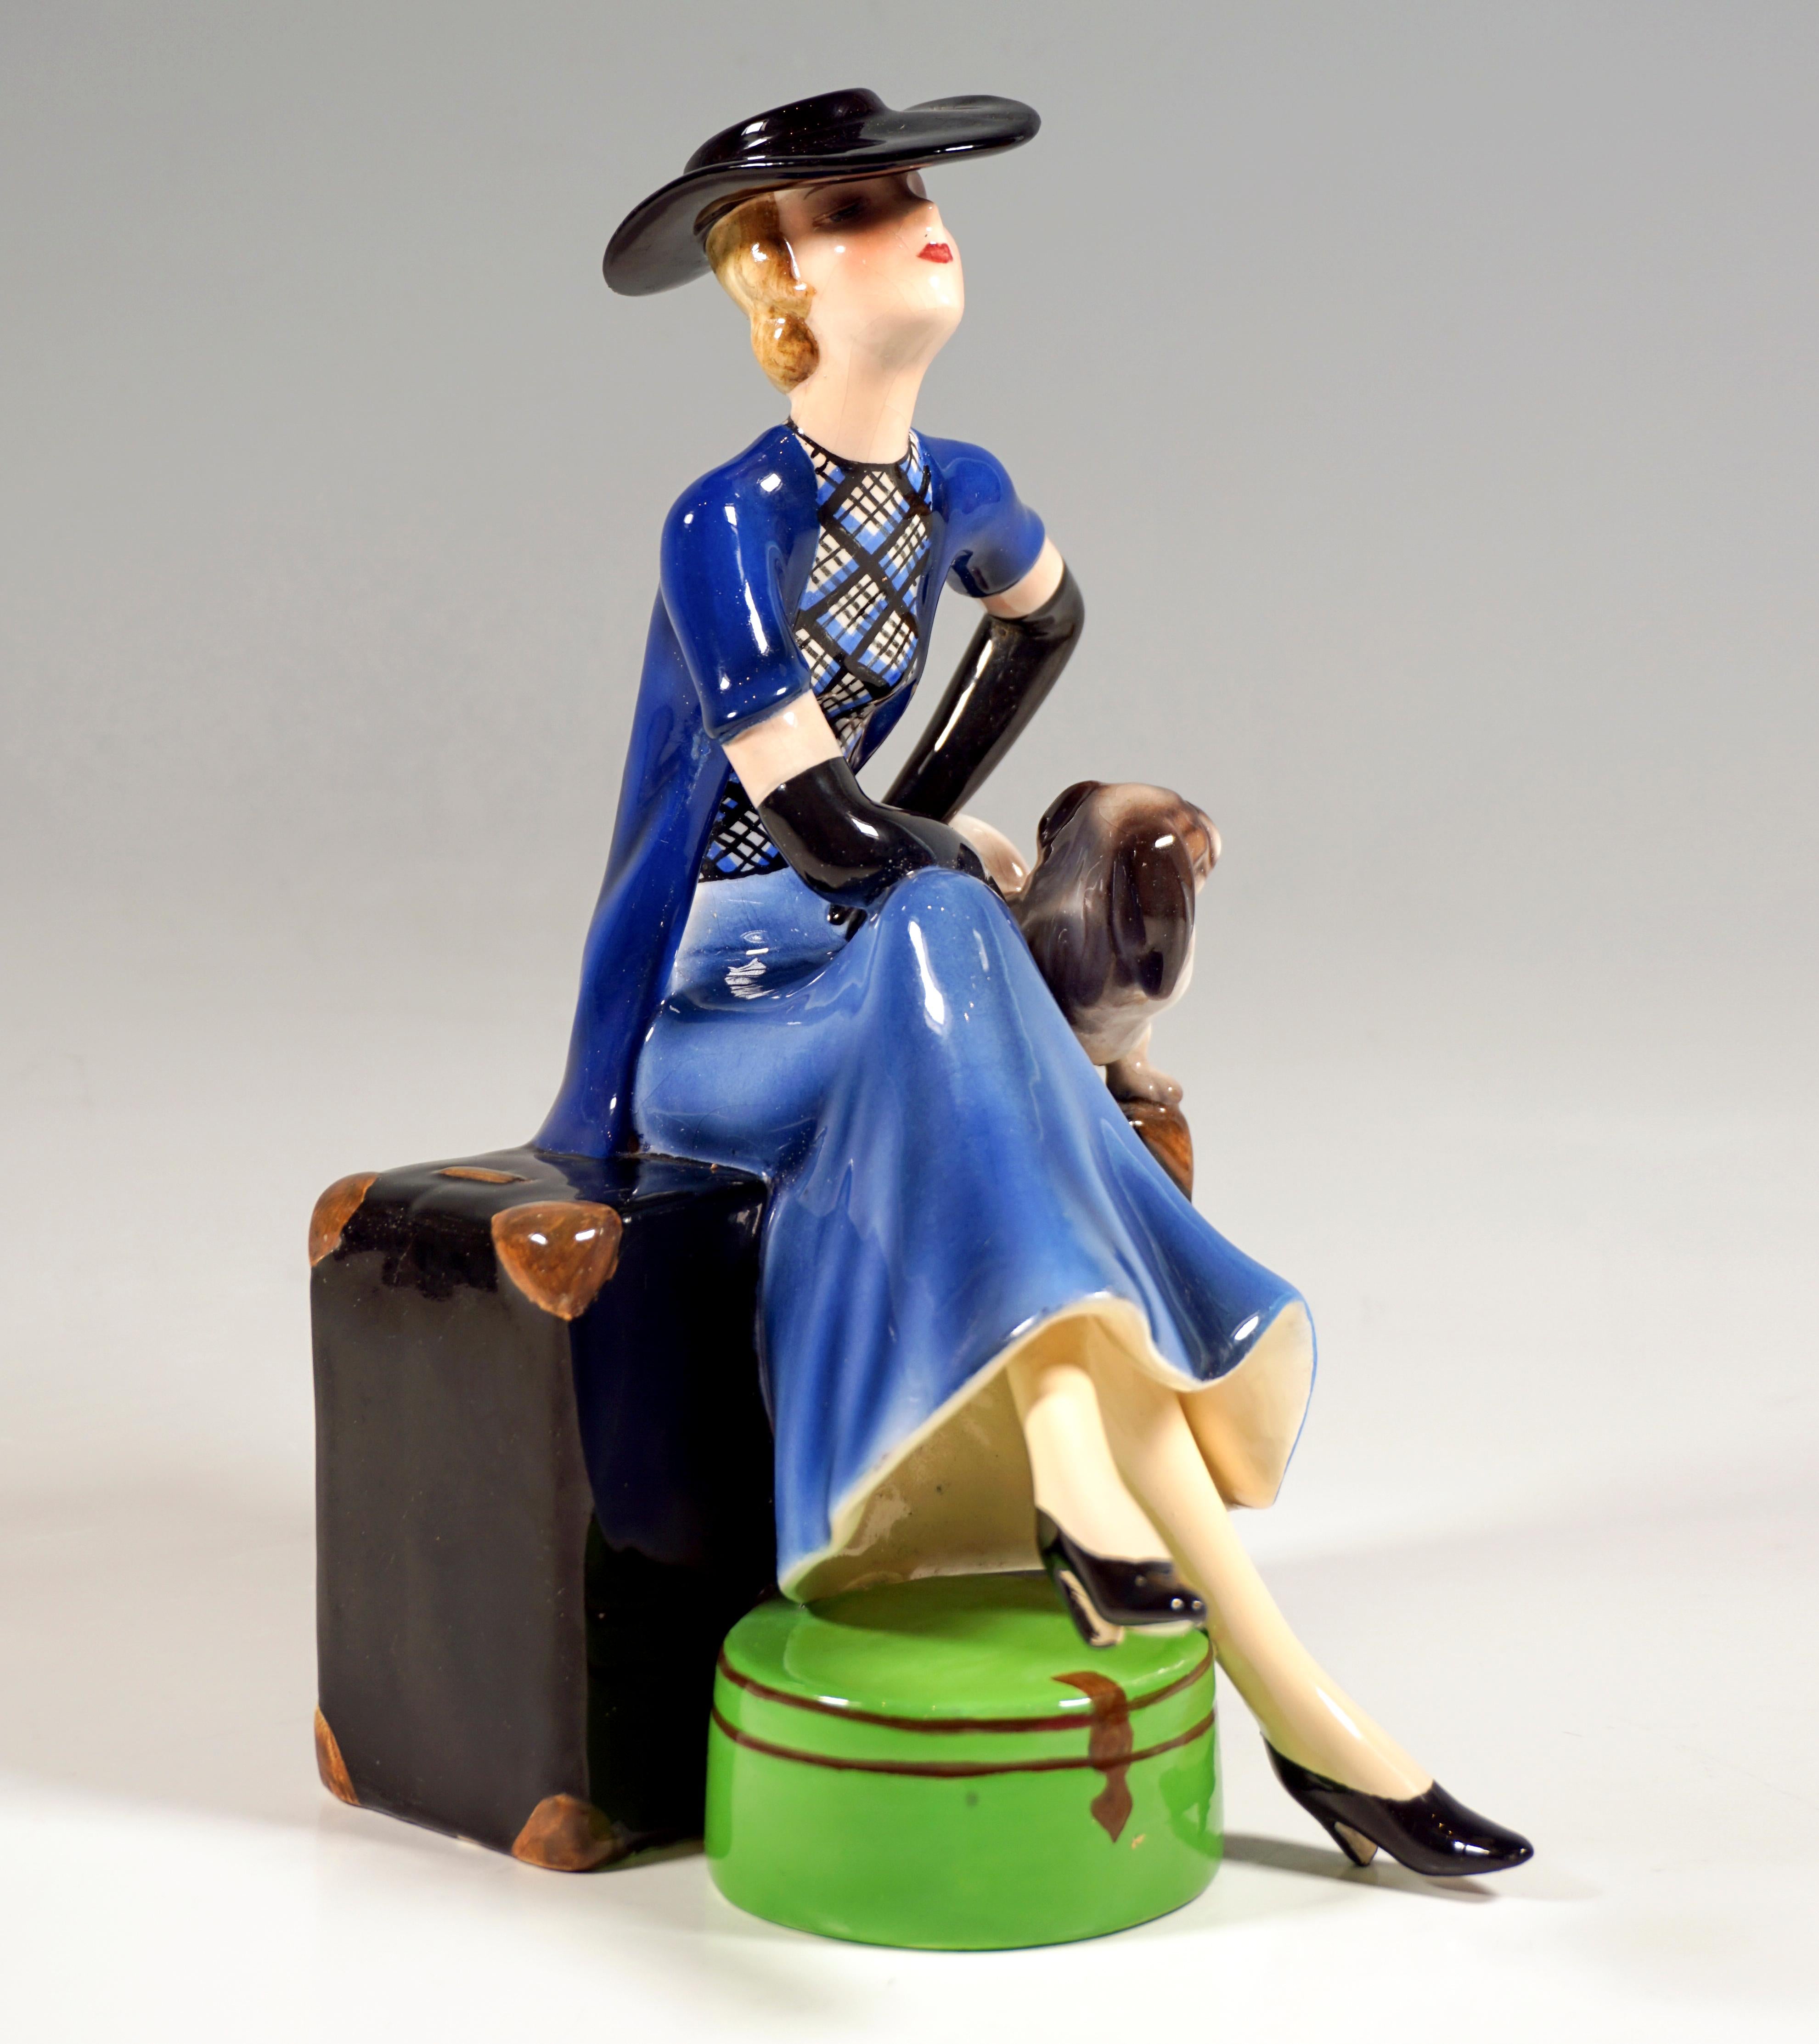 Rare and delicate Goldscheider Art Déco ceramic figurine of the 1930s:
Young lady with chin-length blond hair and elegant black hat, blue skirt and checked blouse, short-sleeved black waistcoat and long black gloves with her legs crossed and her